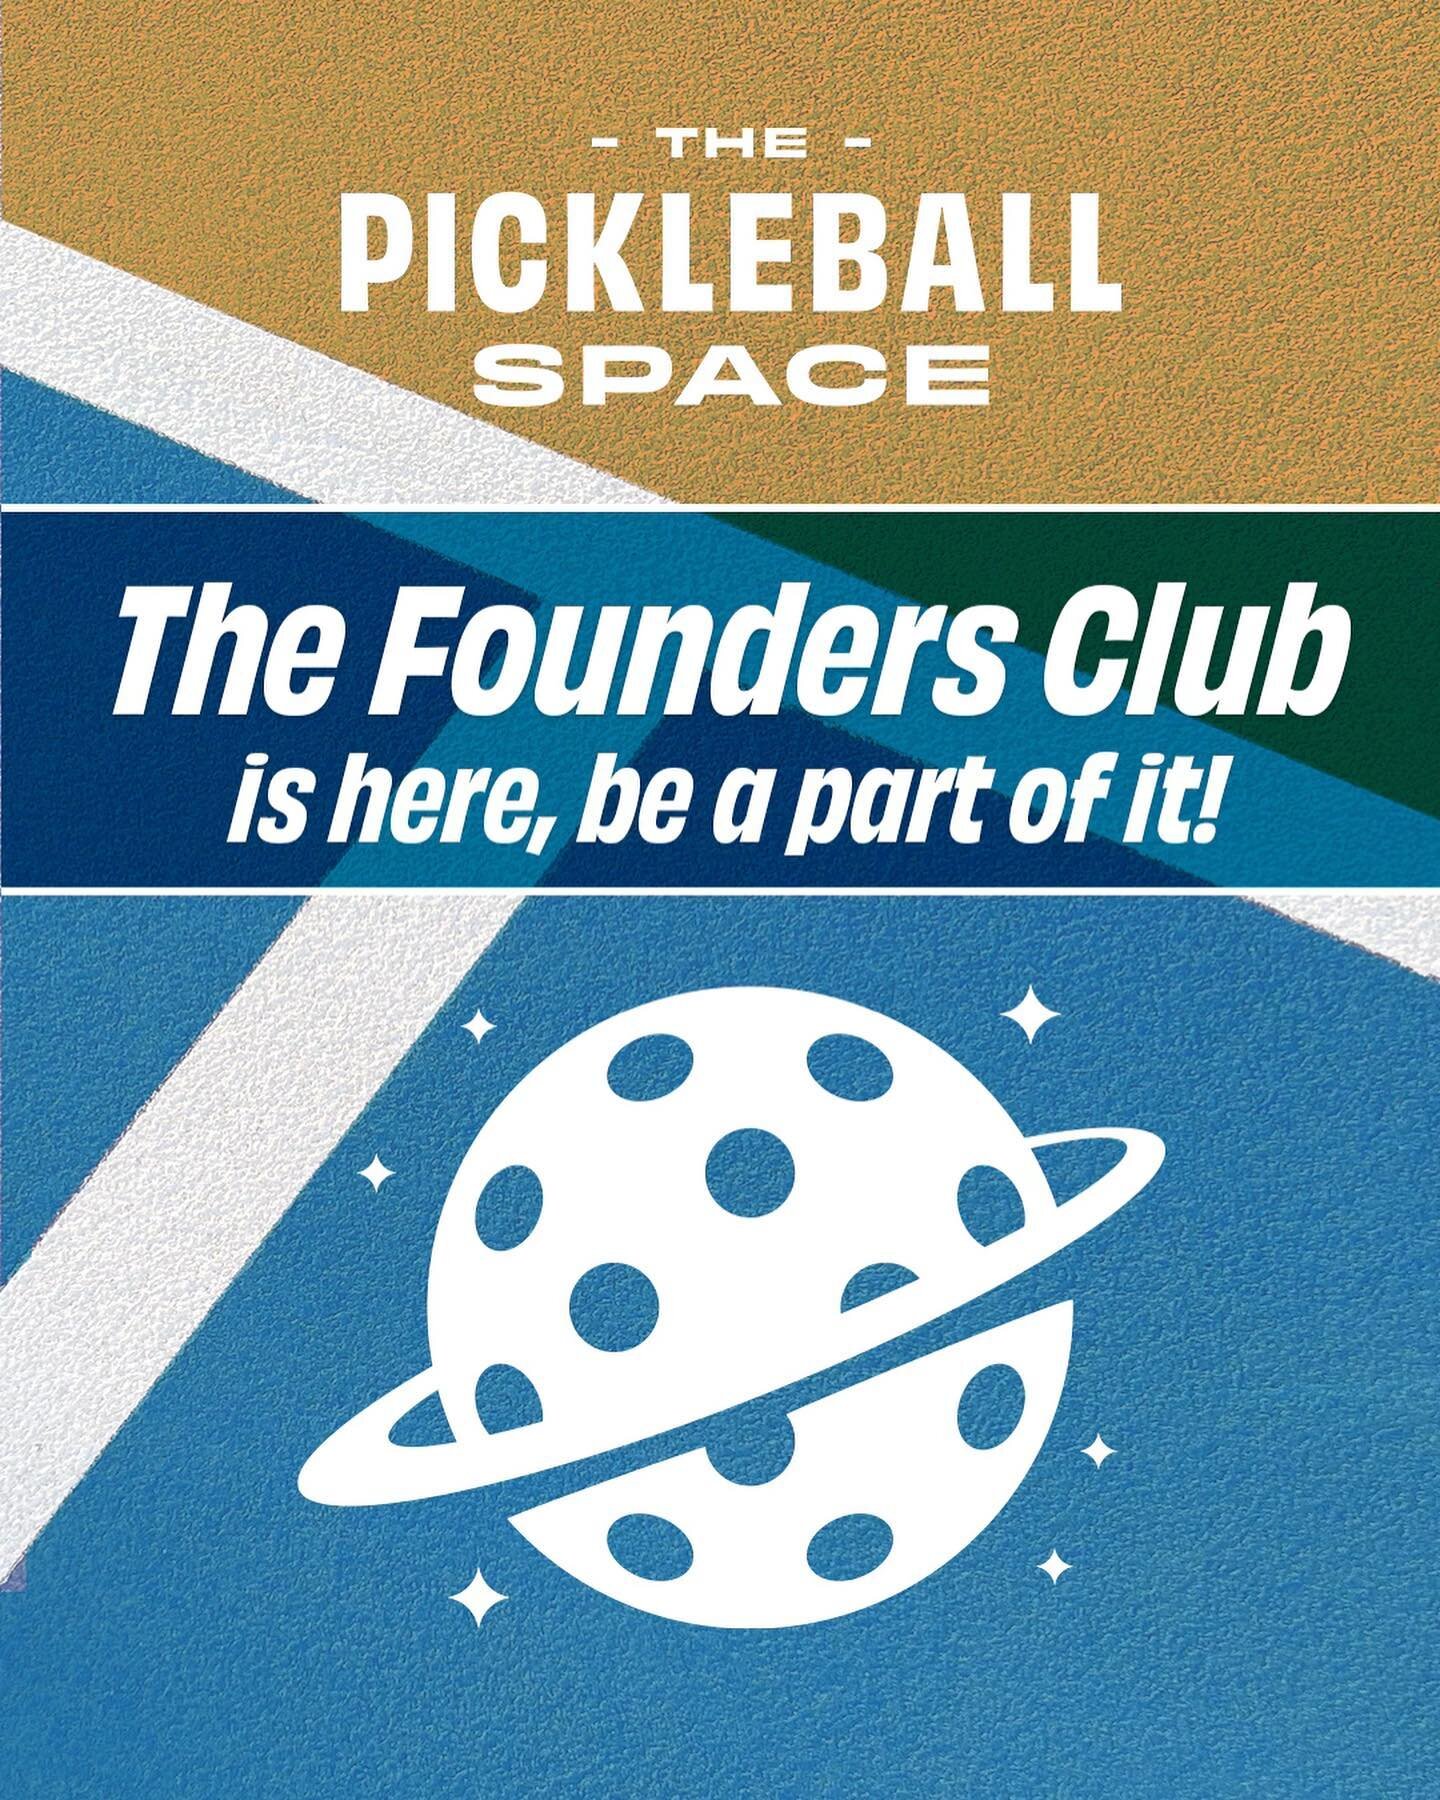 Welcome to The Pickleball Space Founders Club🏓 Where the game thrives.  Be part of the exclusive group shaping the future of our SPACE. . . . 
#pickleballaz #indoorpickleball #pickleballfounders #glendaleaz